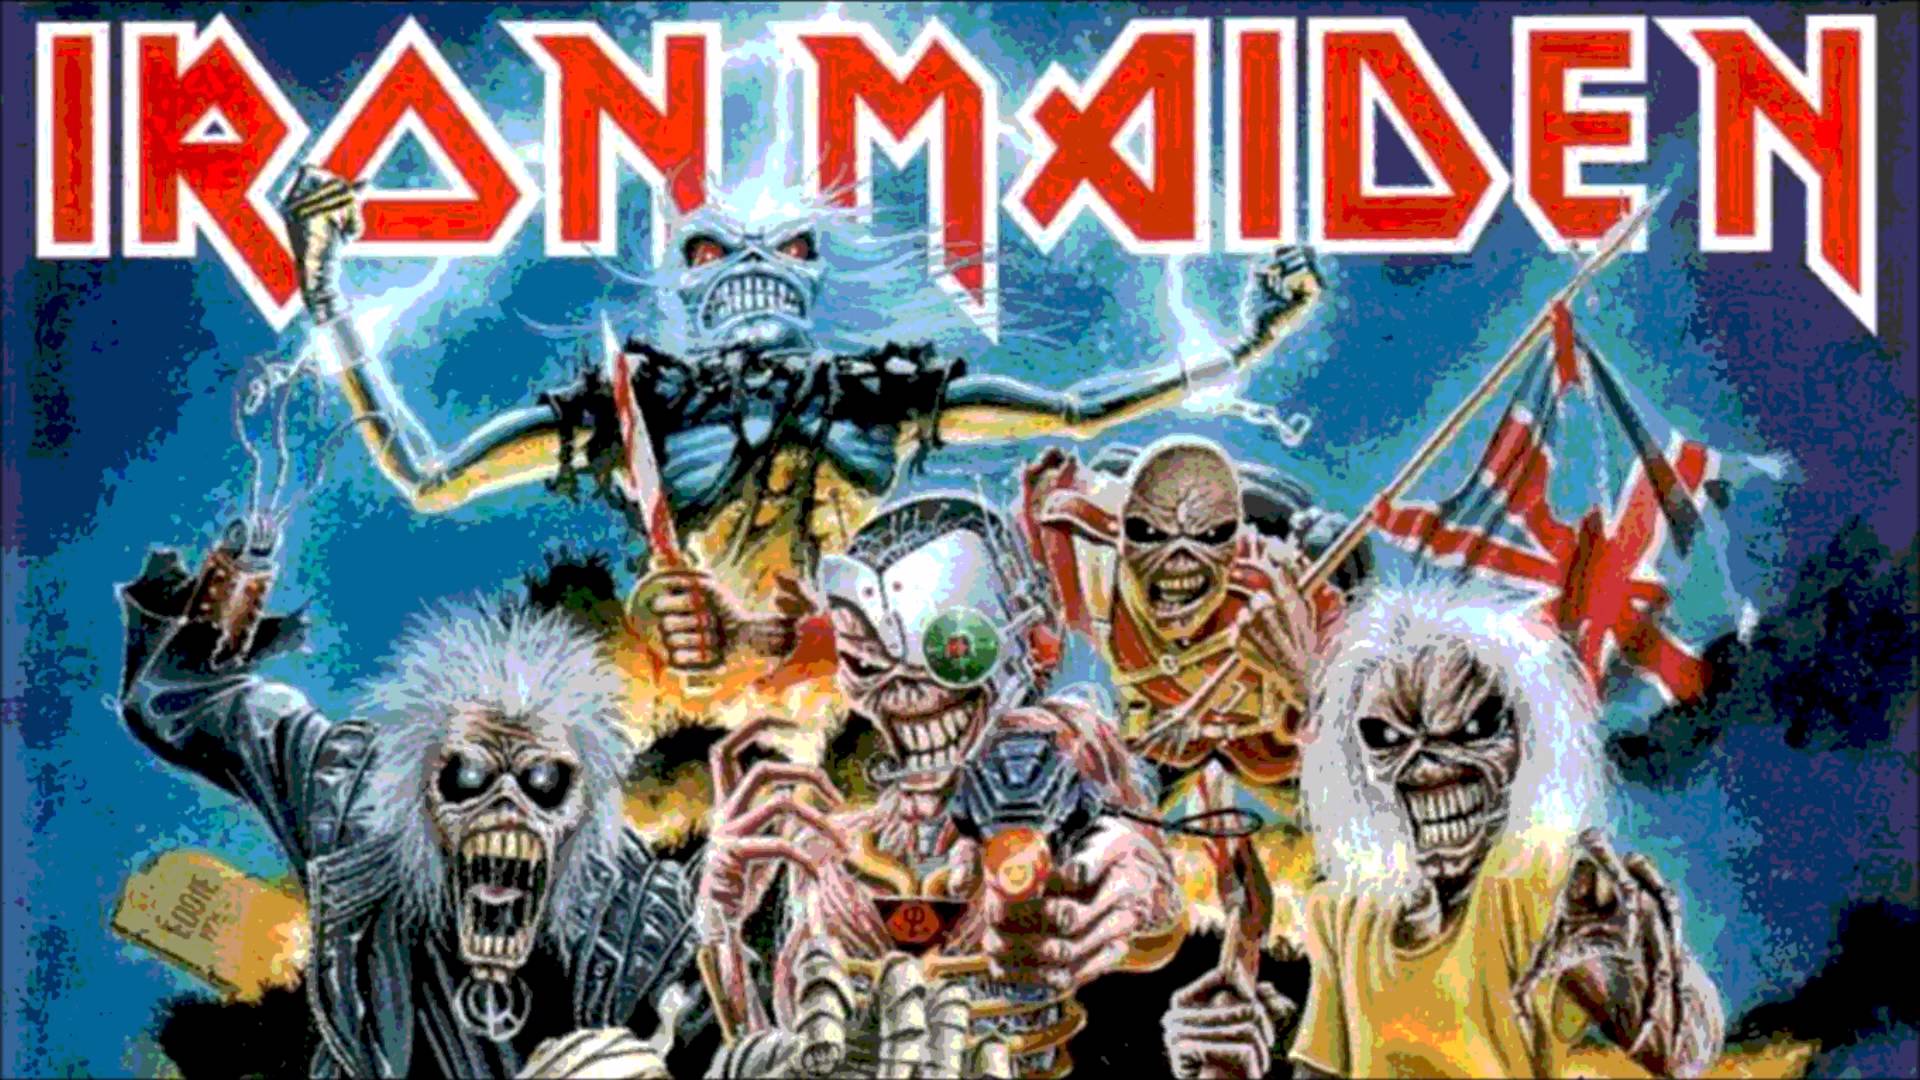 Iron Maiden The Trooper (D Standard Tuning Backing Track)